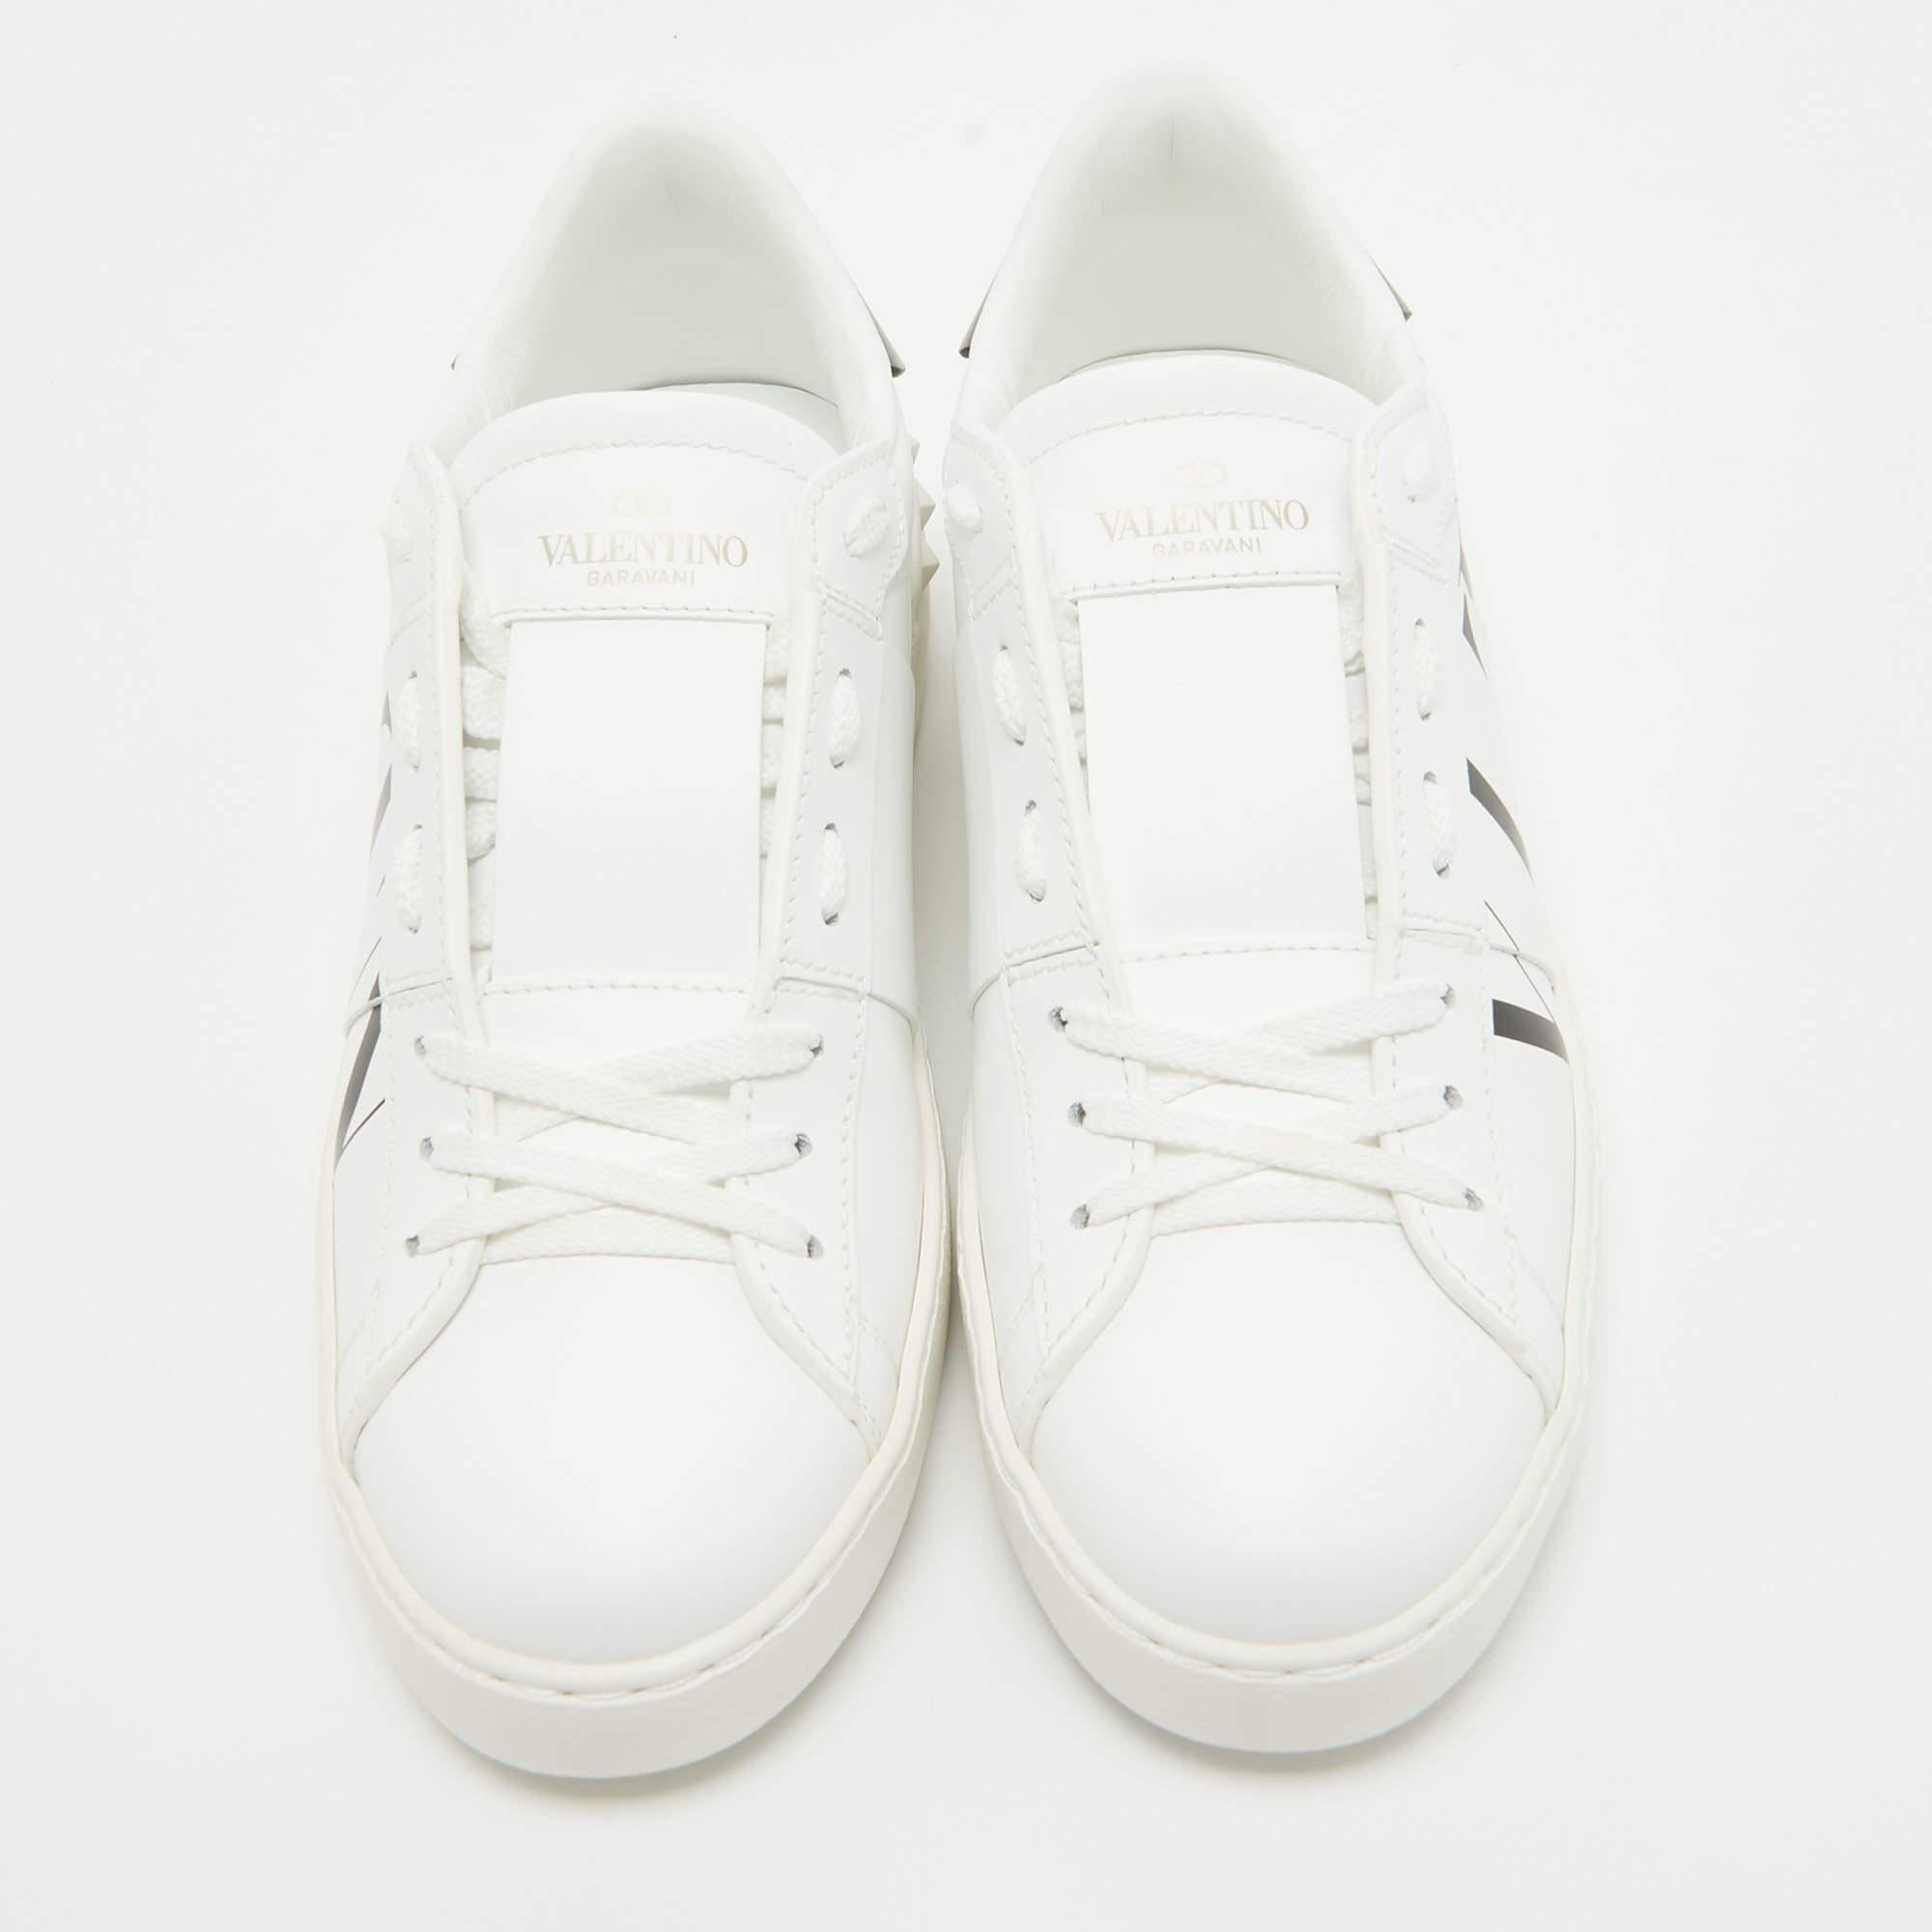 Give your outfit a luxe update with this pair of Valentino VLTN sneakers. The shoes are sewn perfectly to help you make a statement in them for a long time.

Includes
Original Dustbag, Original Box, Info Booklet, Extra Laces